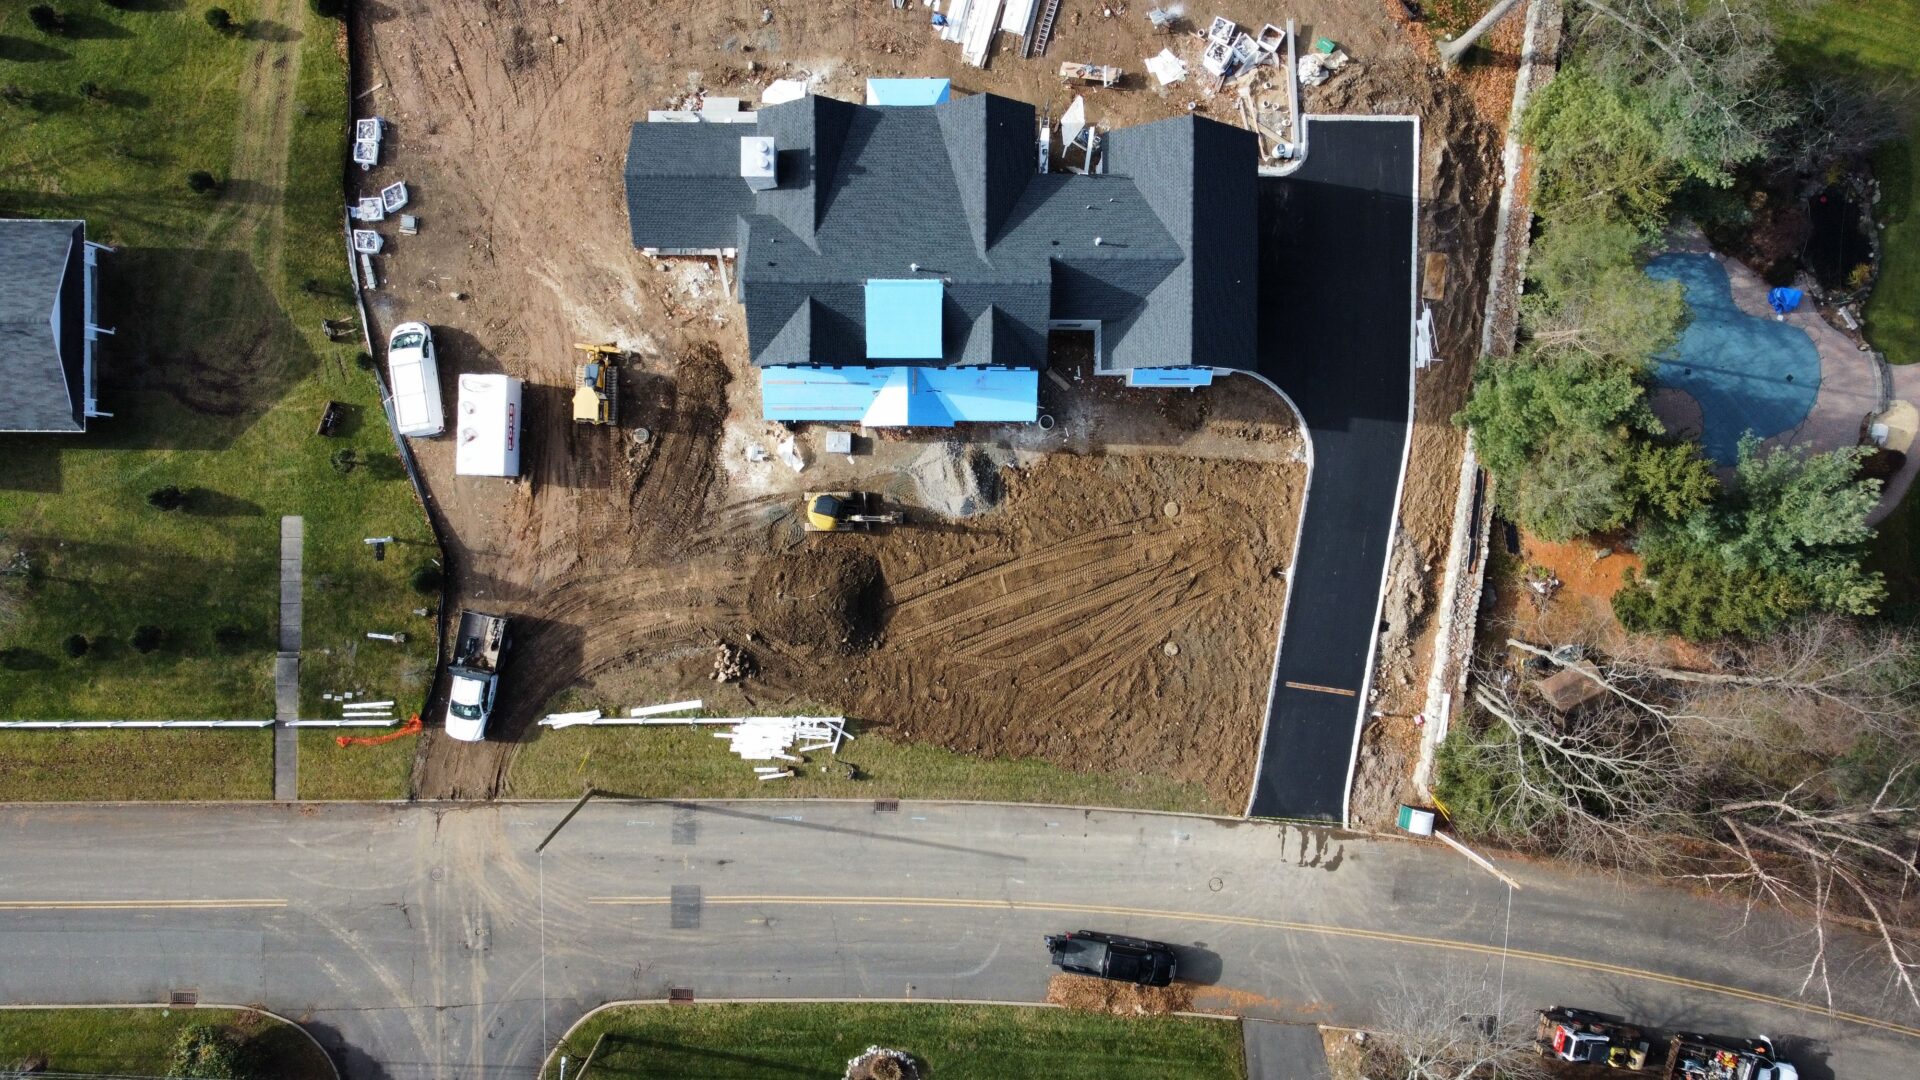 An ariel view of the construction of a house